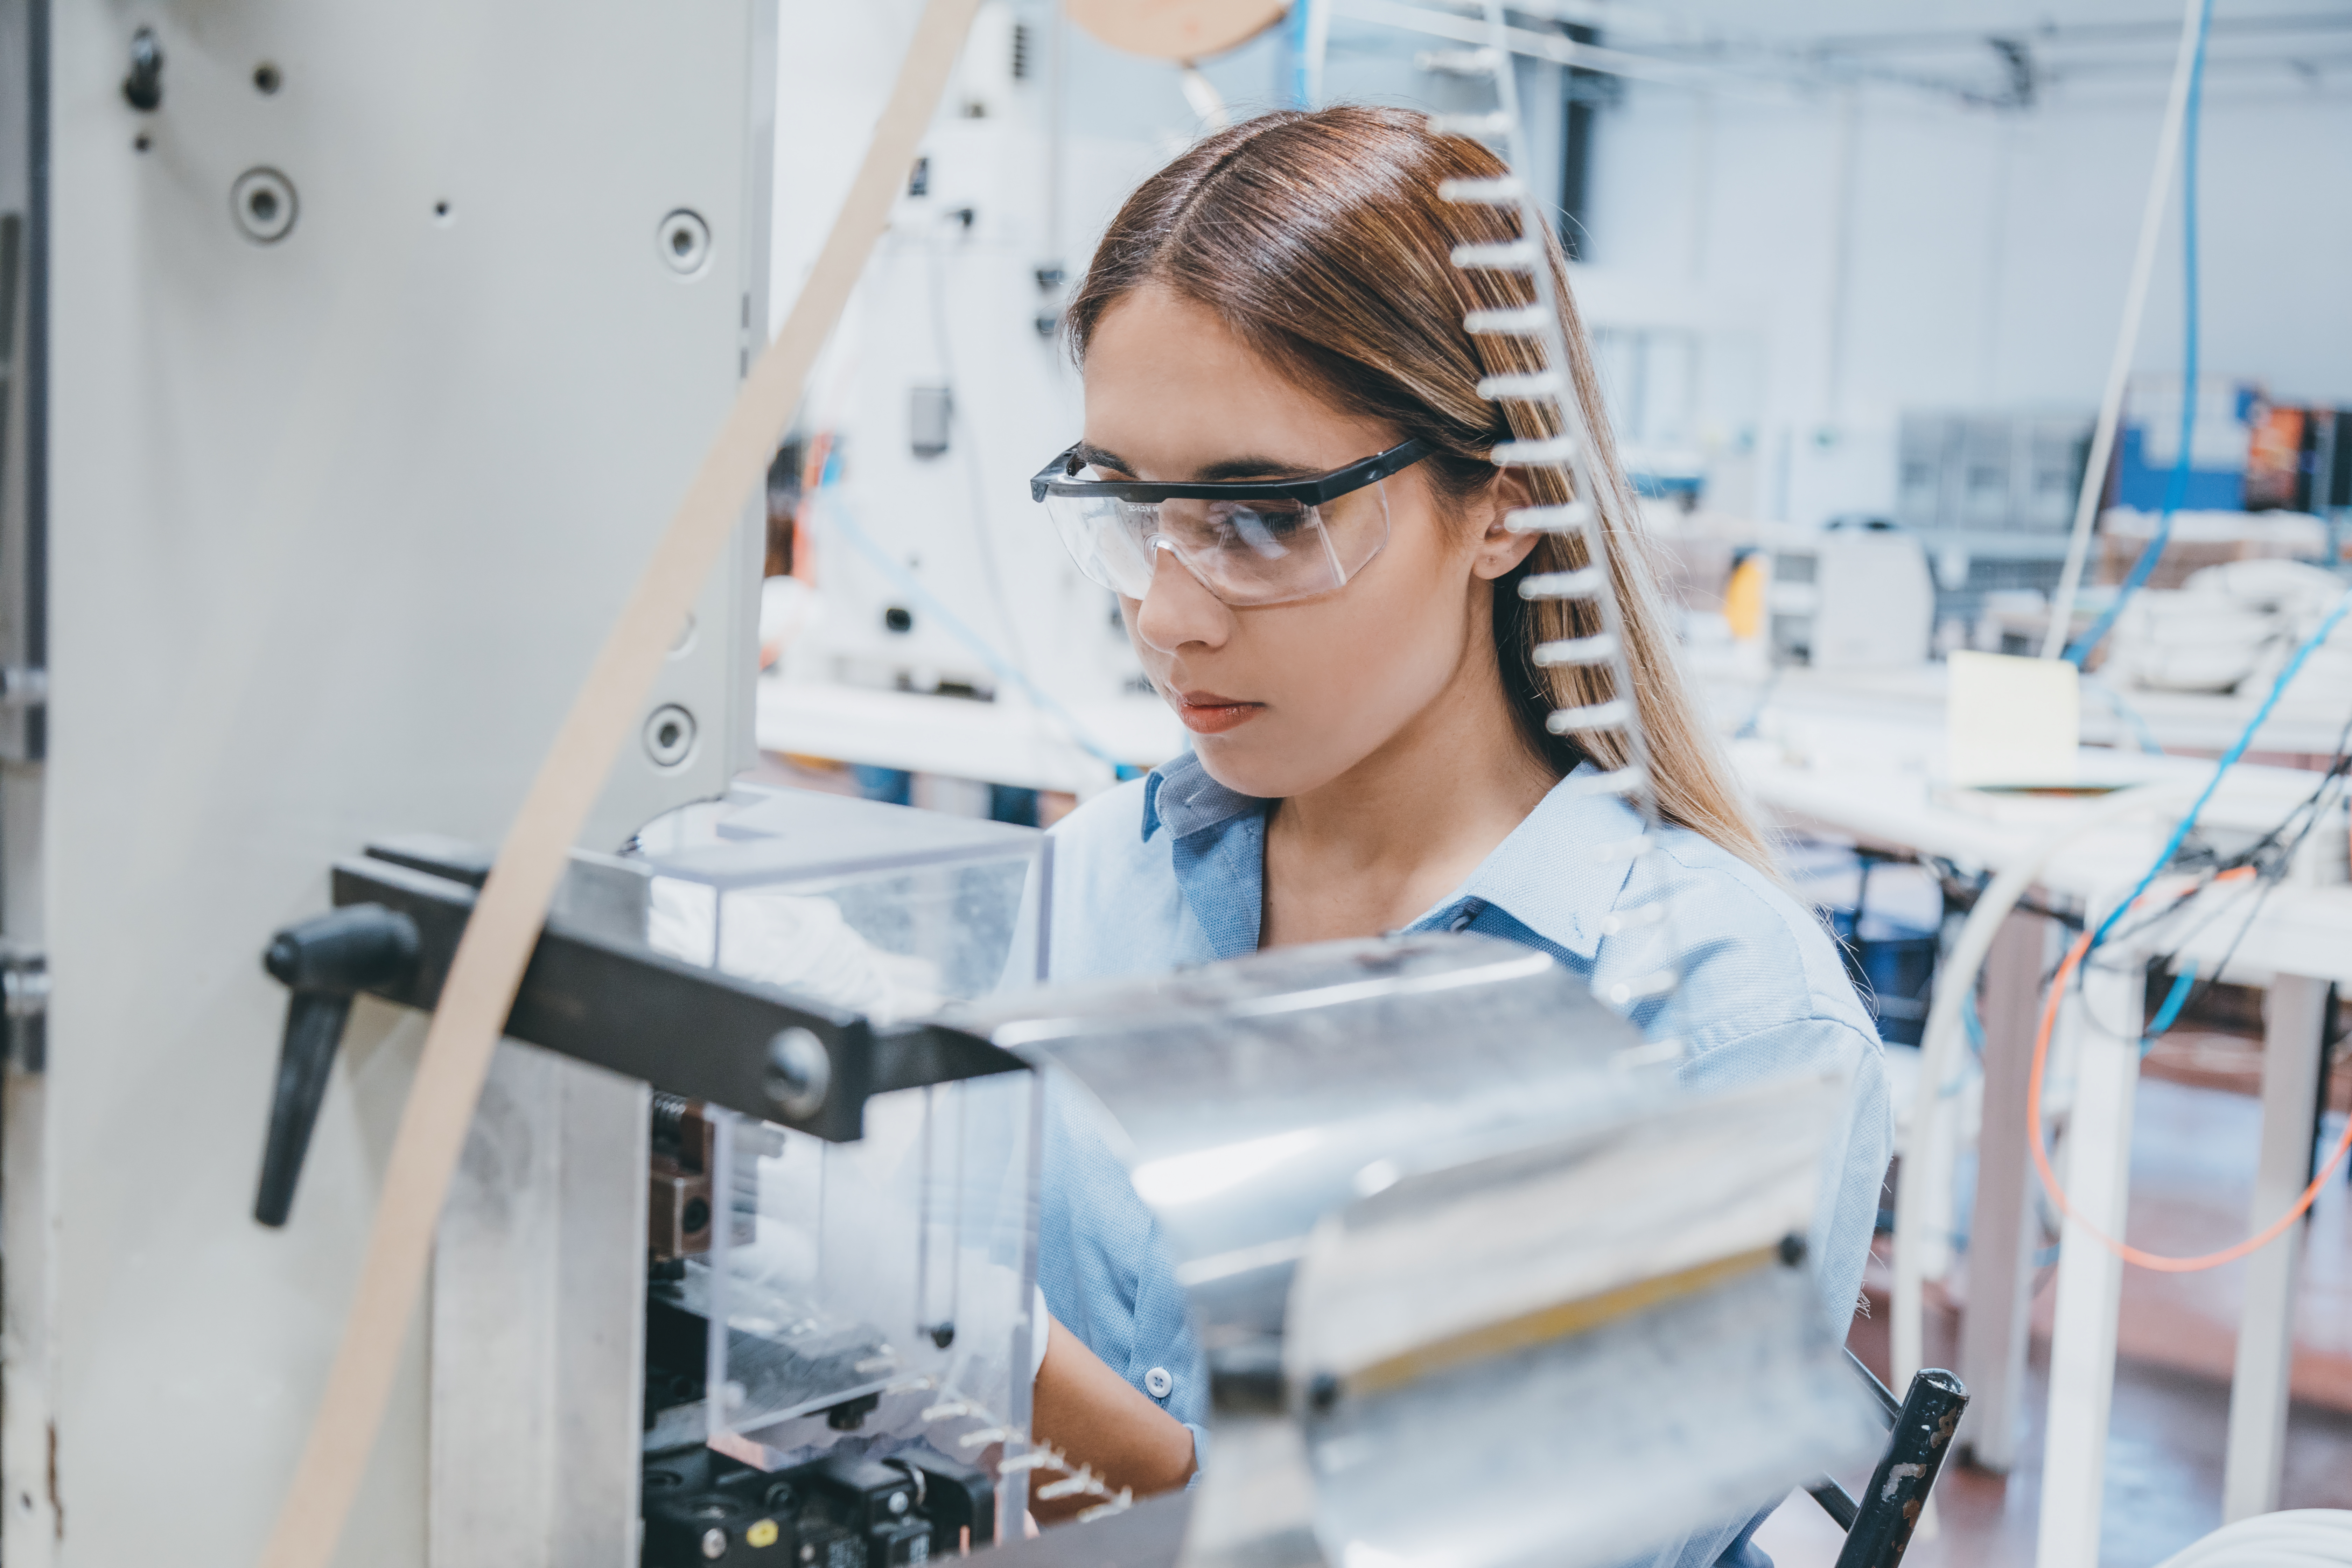 6 Female Engineers You Should Know